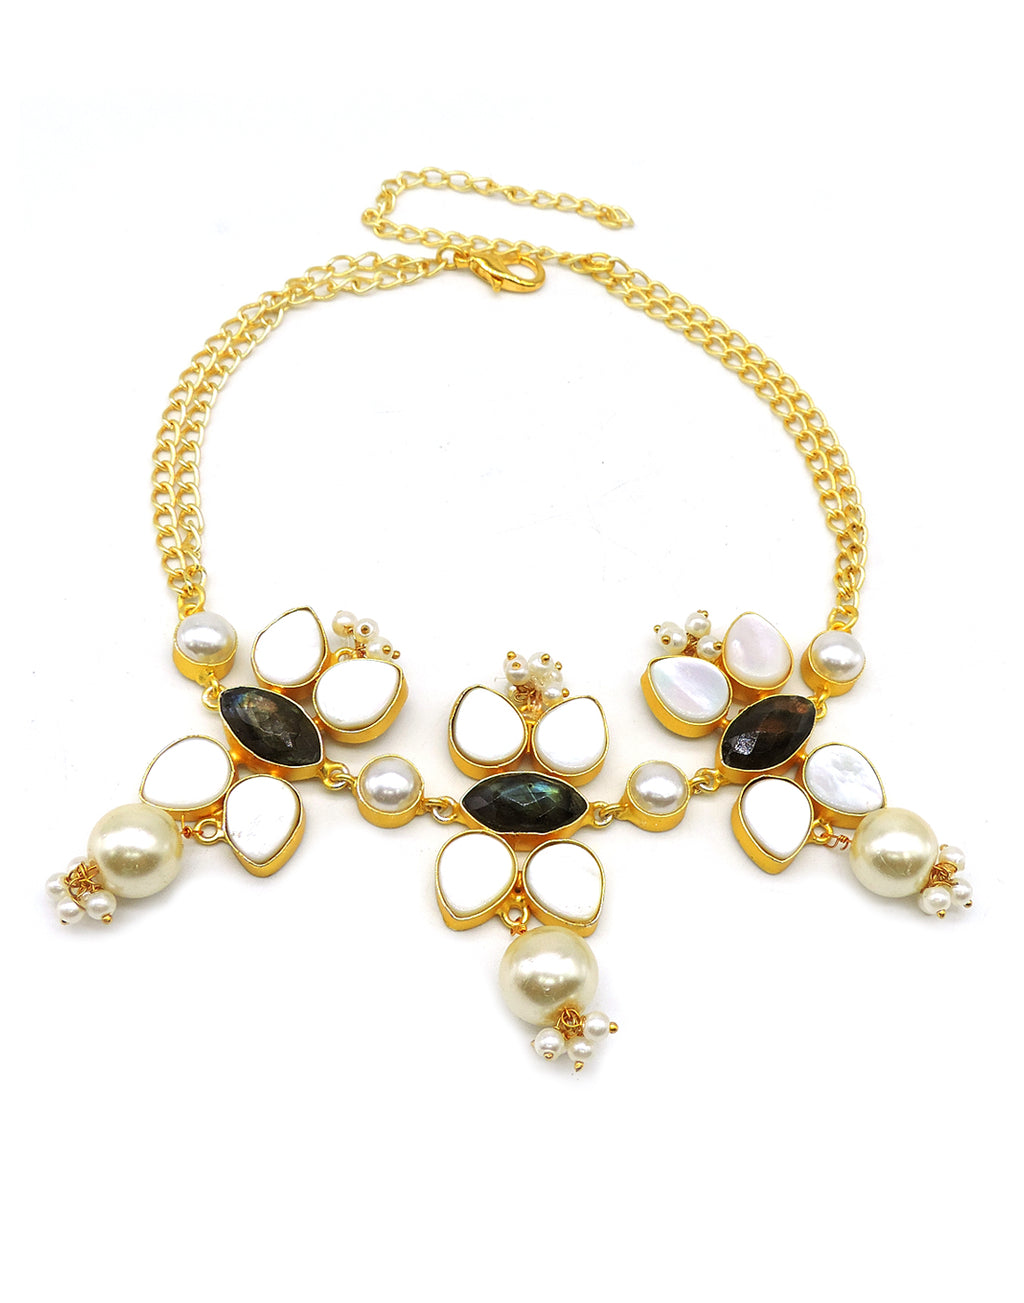 Pearl Flower Trio Necklace - Statement Necklaces - Gold-Plated & Hypoallergenic Jewellery - Made in India - Dubai Jewellery - Dori